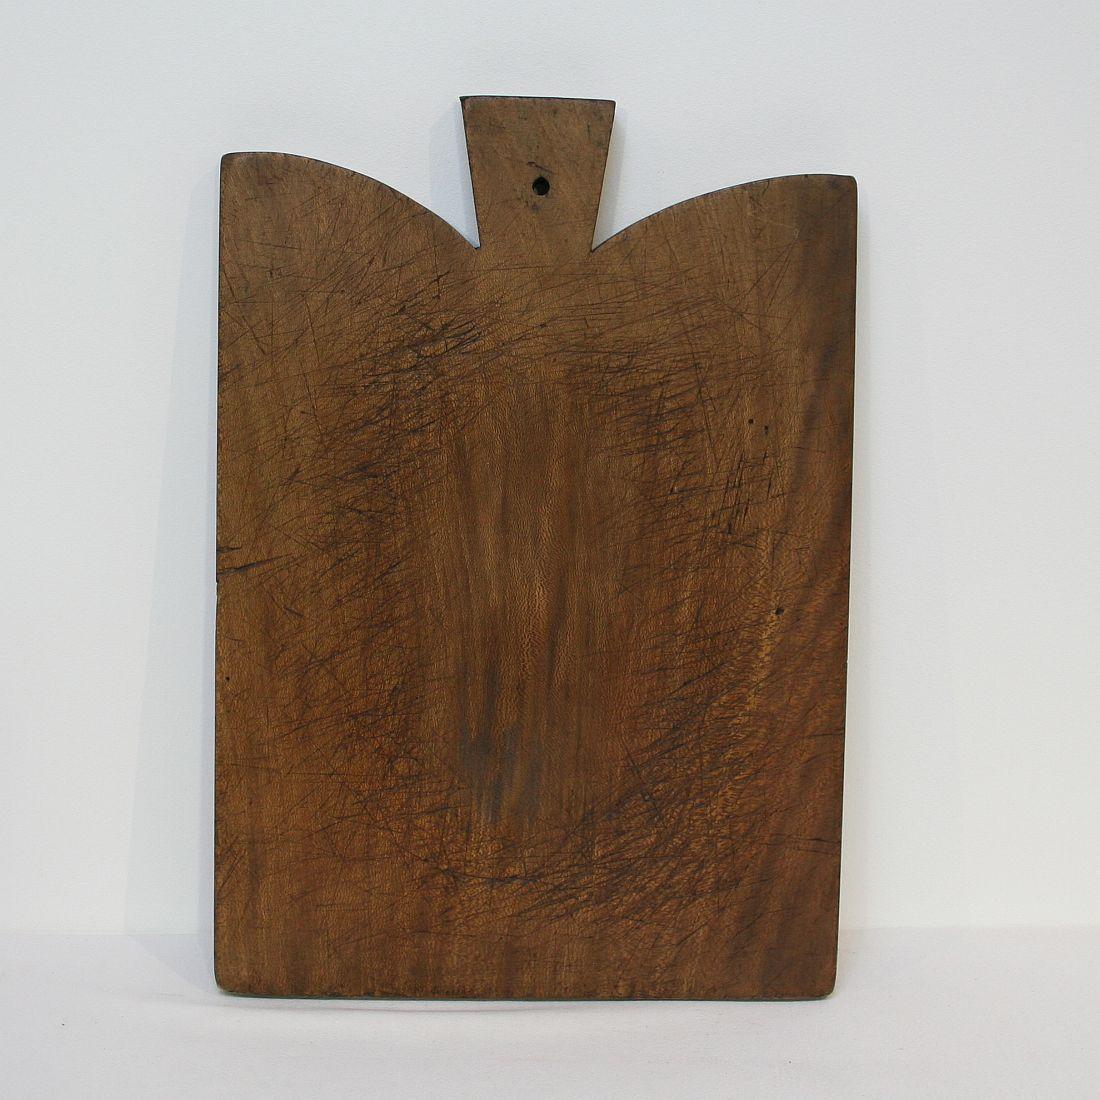 French Provincial Collection of Three Rare French 19th Century, Wooden Chopping / Cutting Boards